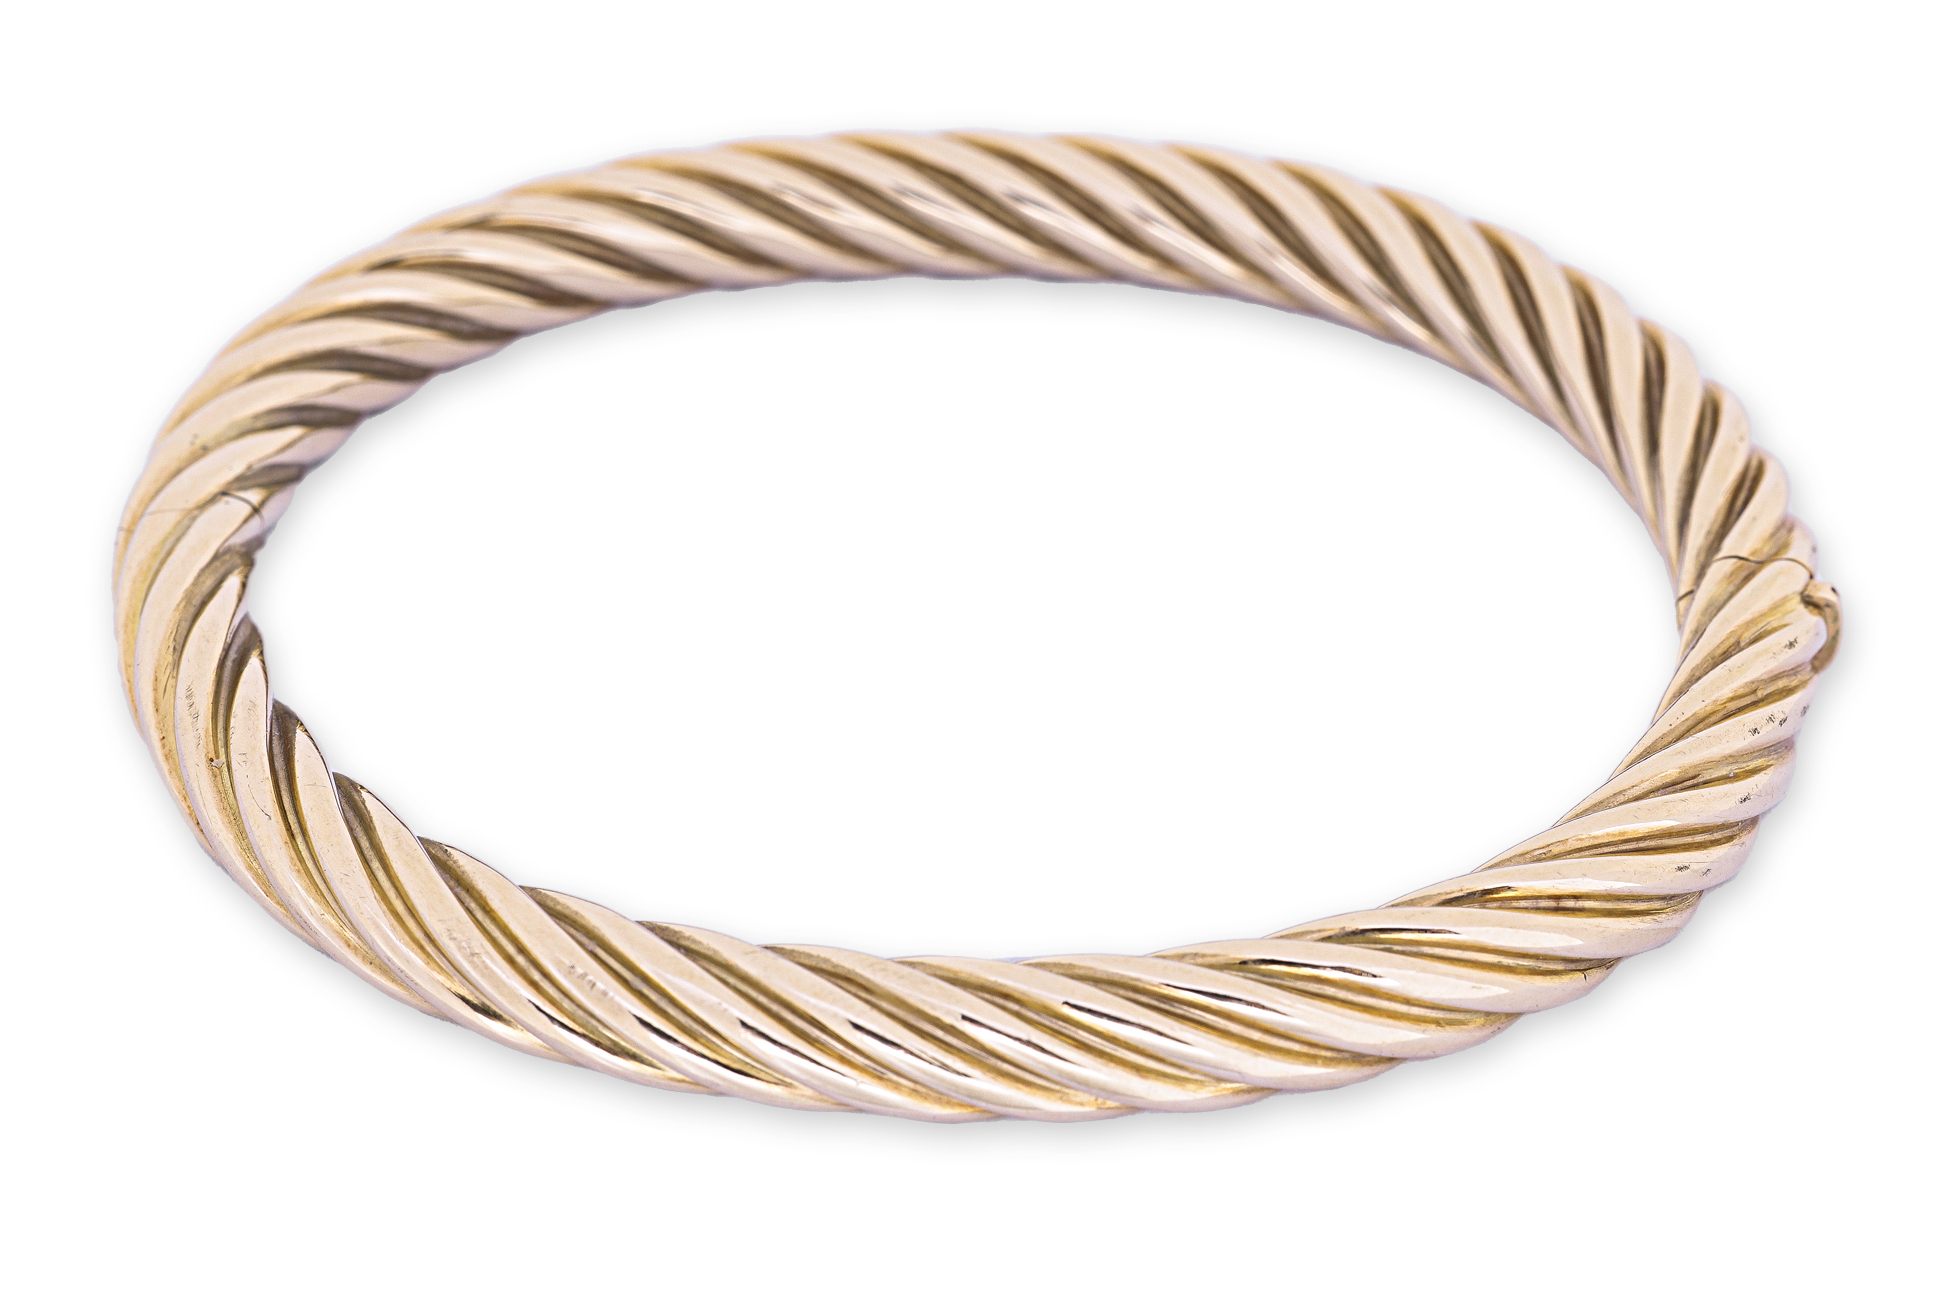 A GOLD BANGLE BY TIFFANY & CO. - Image 2 of 7